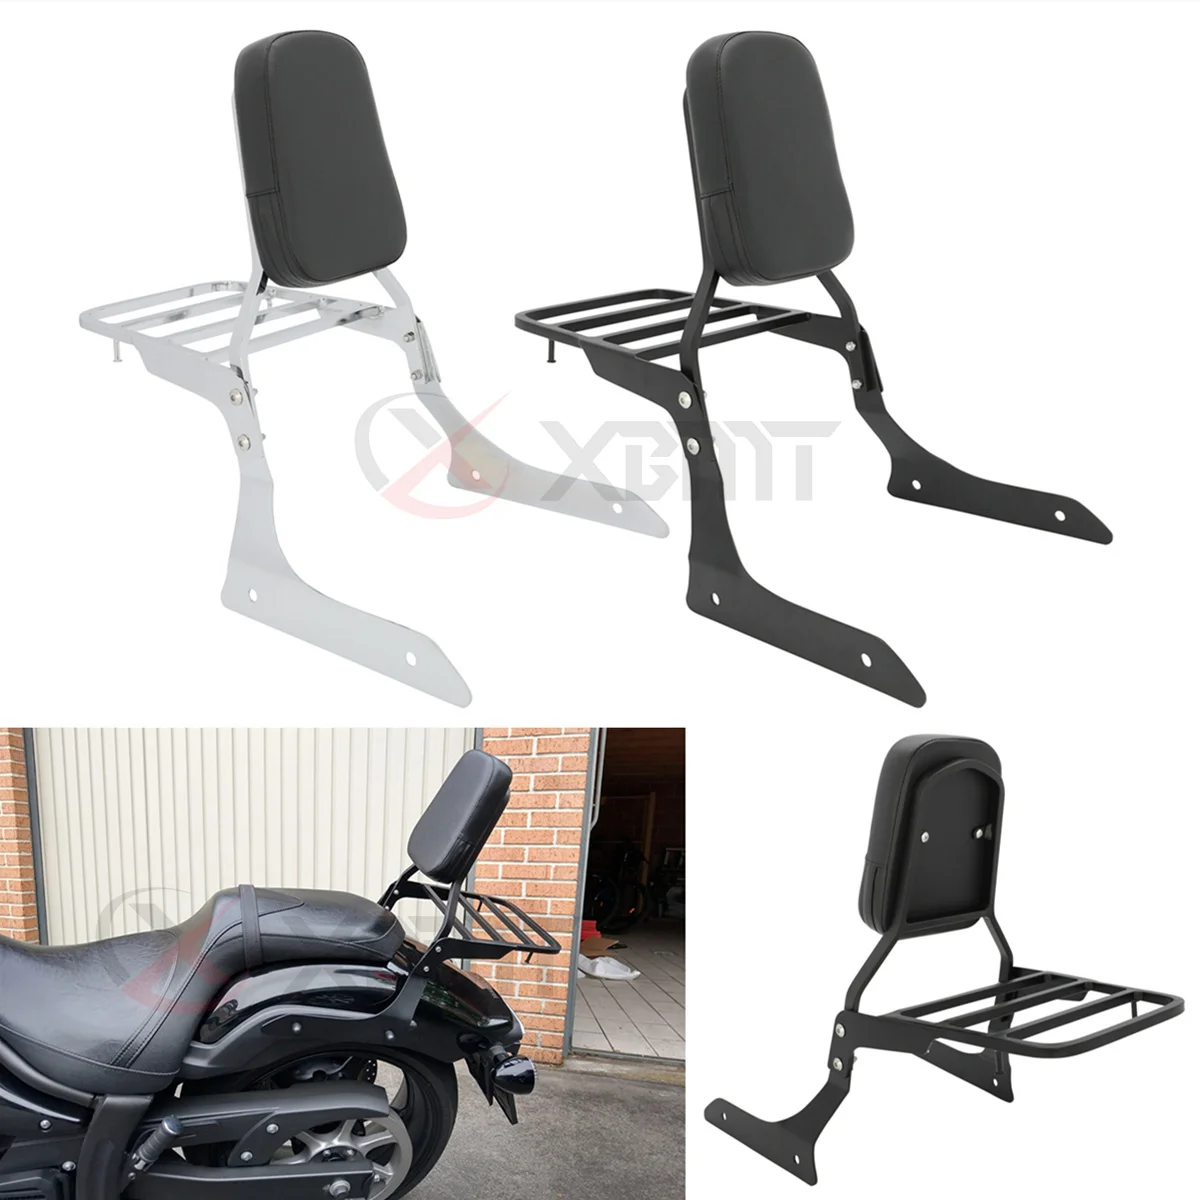 Motorcycle Accessories Backrest Sissy Bar with Luggage Rack For Yamaha  Stryker 1300 XVS1300 2011-2017